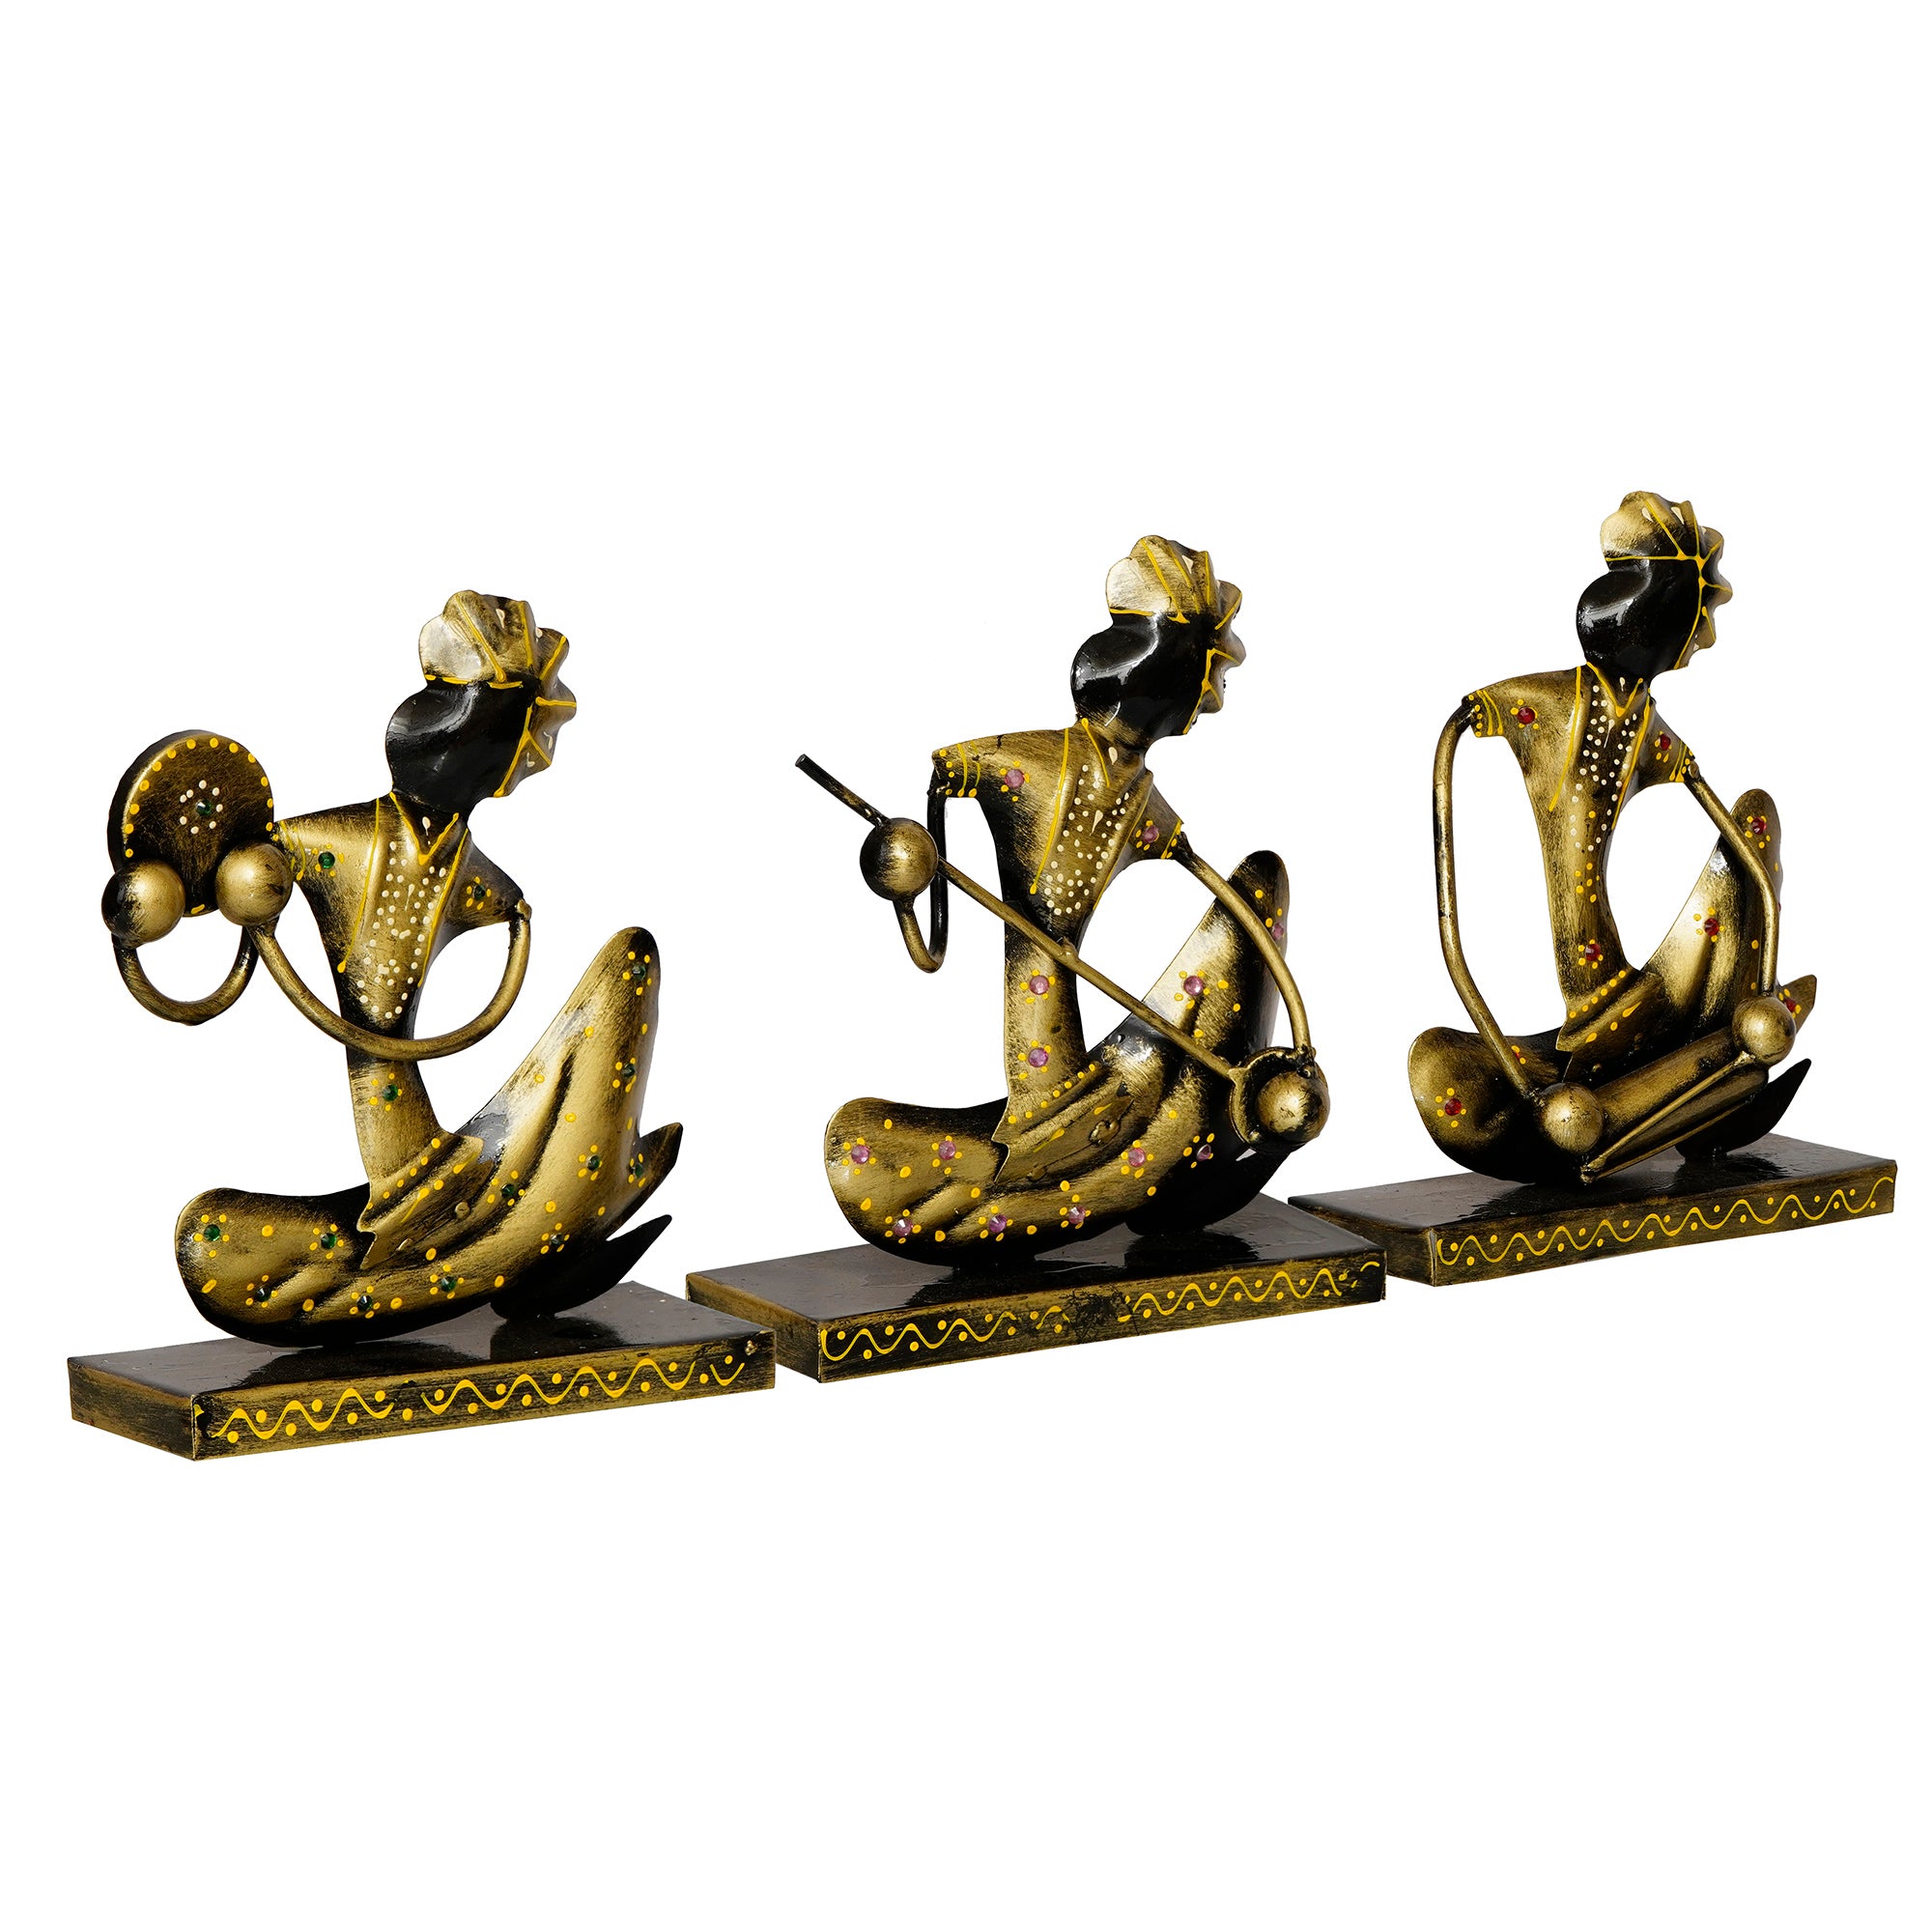 Iron Set of 3 Tribal Man Figurines with Paghdi Playing Tambourine/Dafli, Banjo, Dholak Musical Instruments Decorative Showpiece (Golden and Black) 3